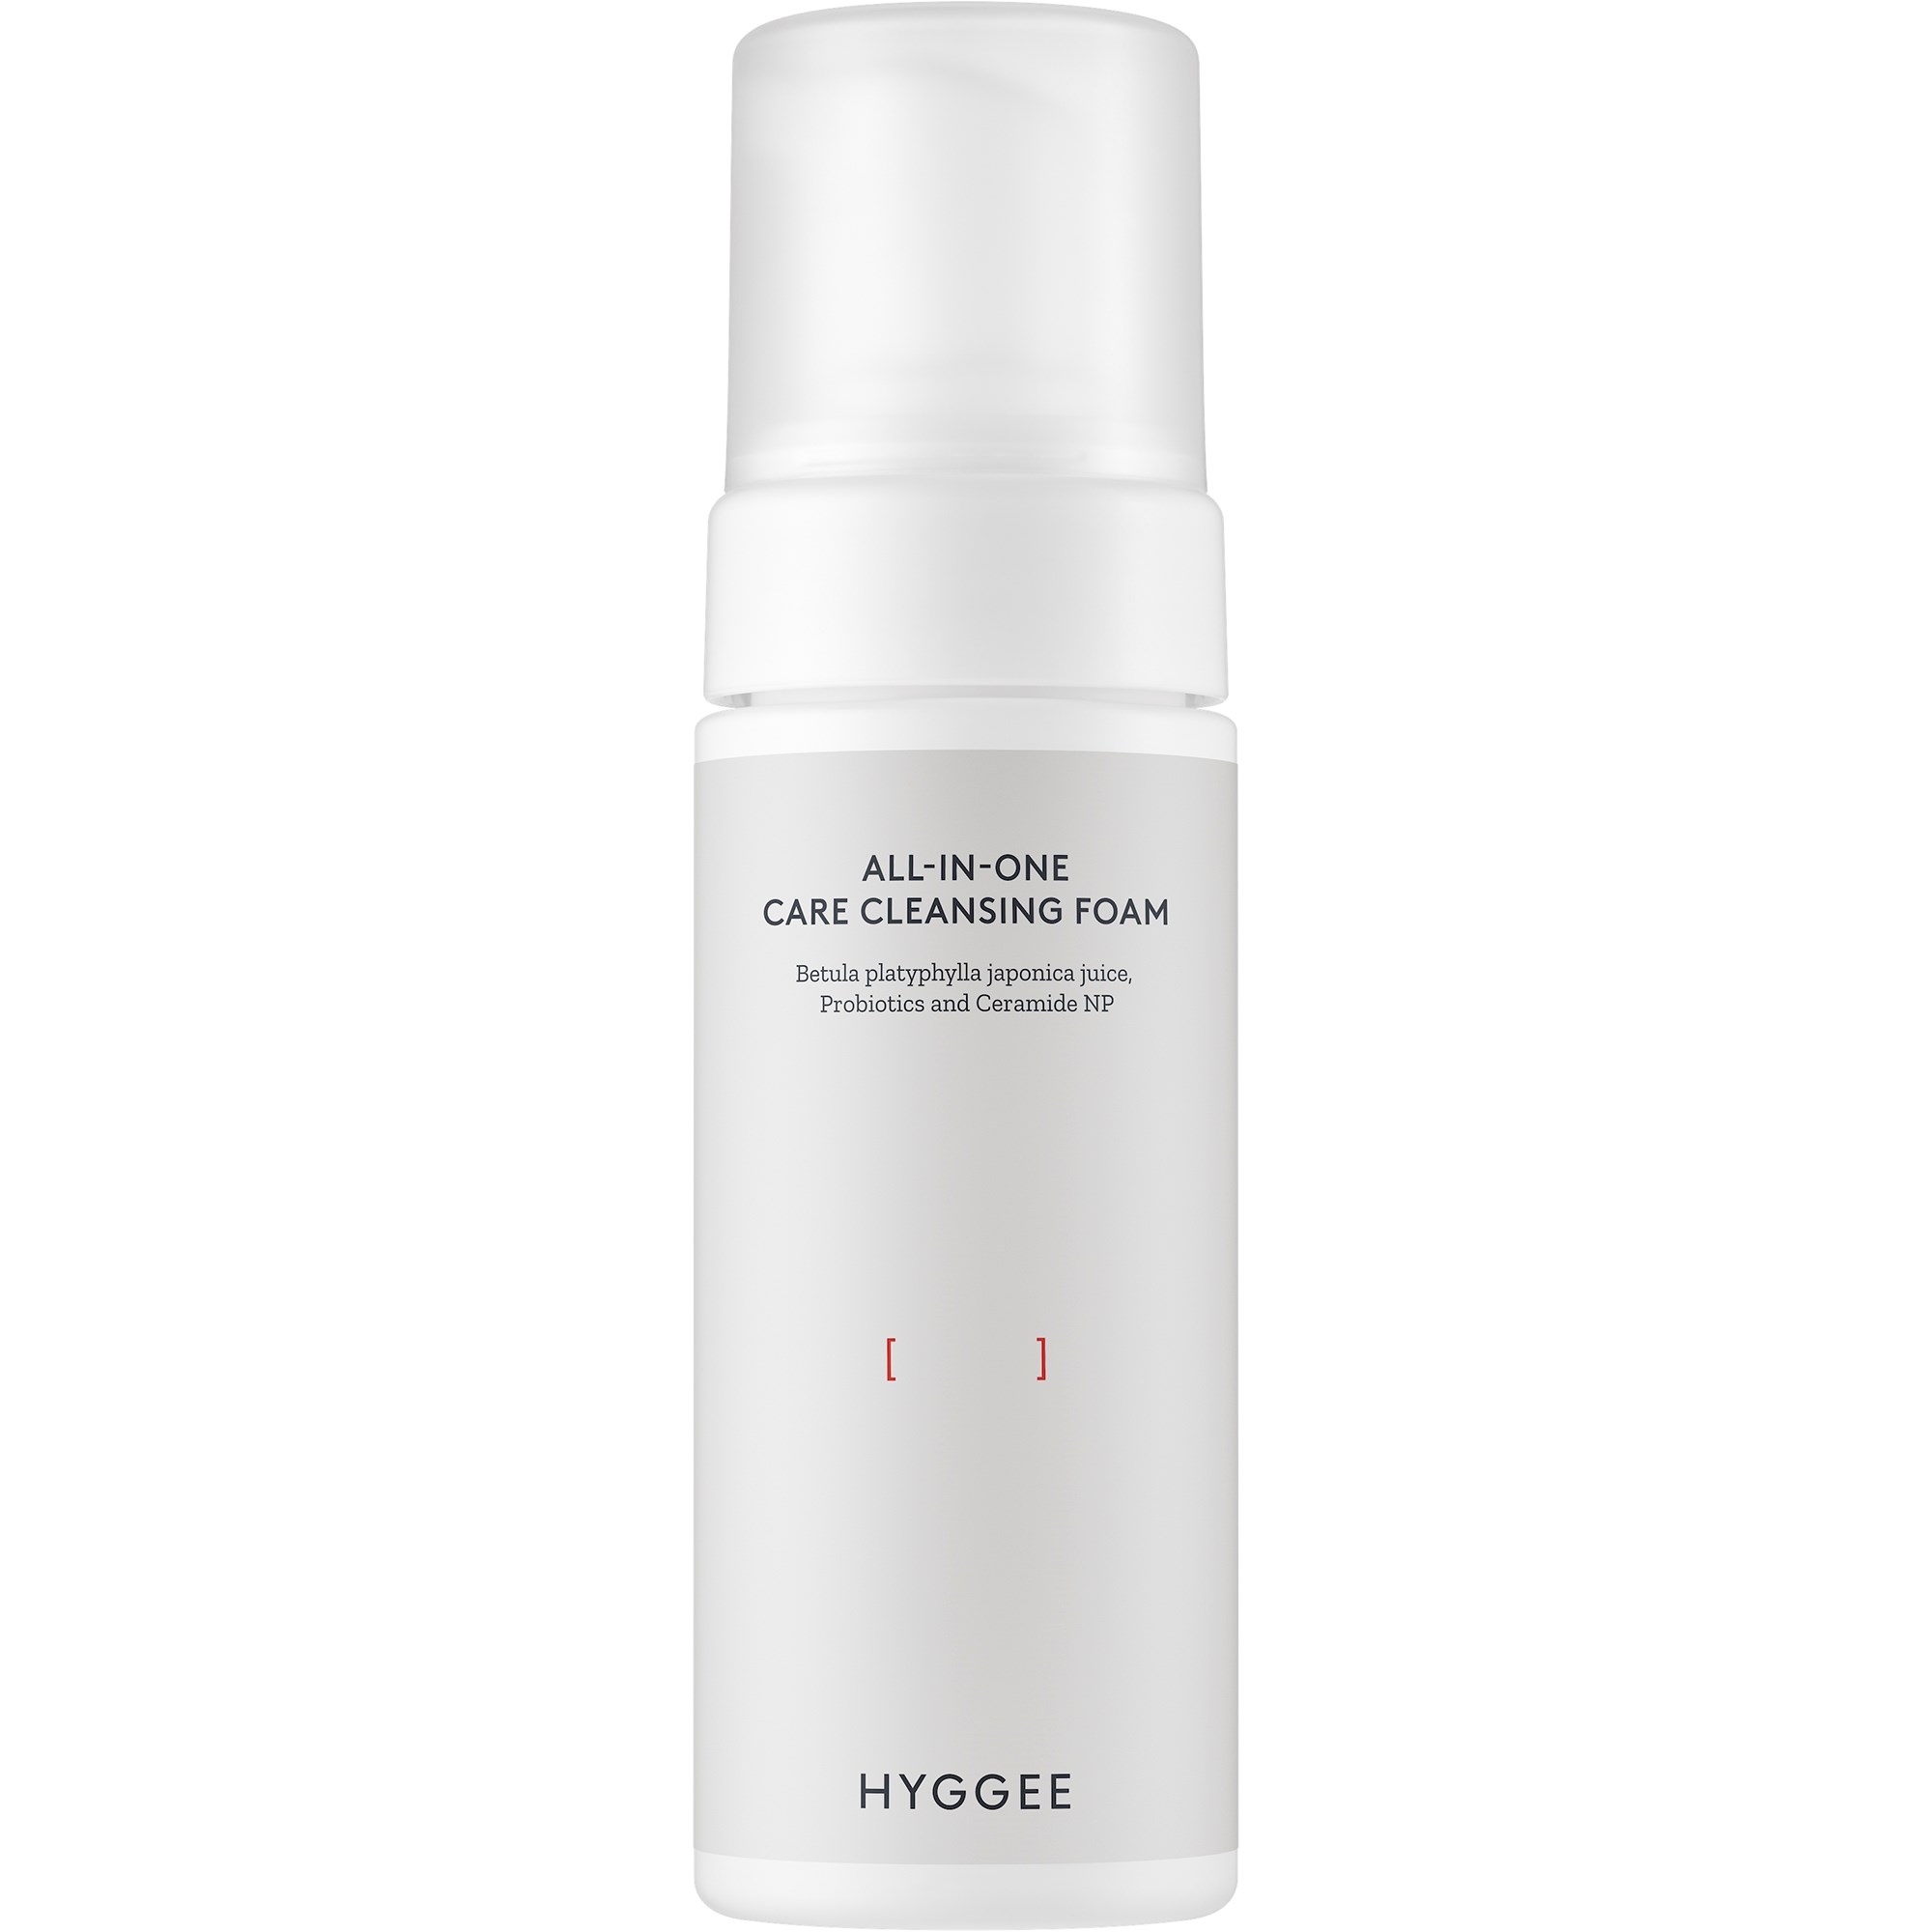 HYGGEE All-in-One Care Cleansing Foam 150 ml